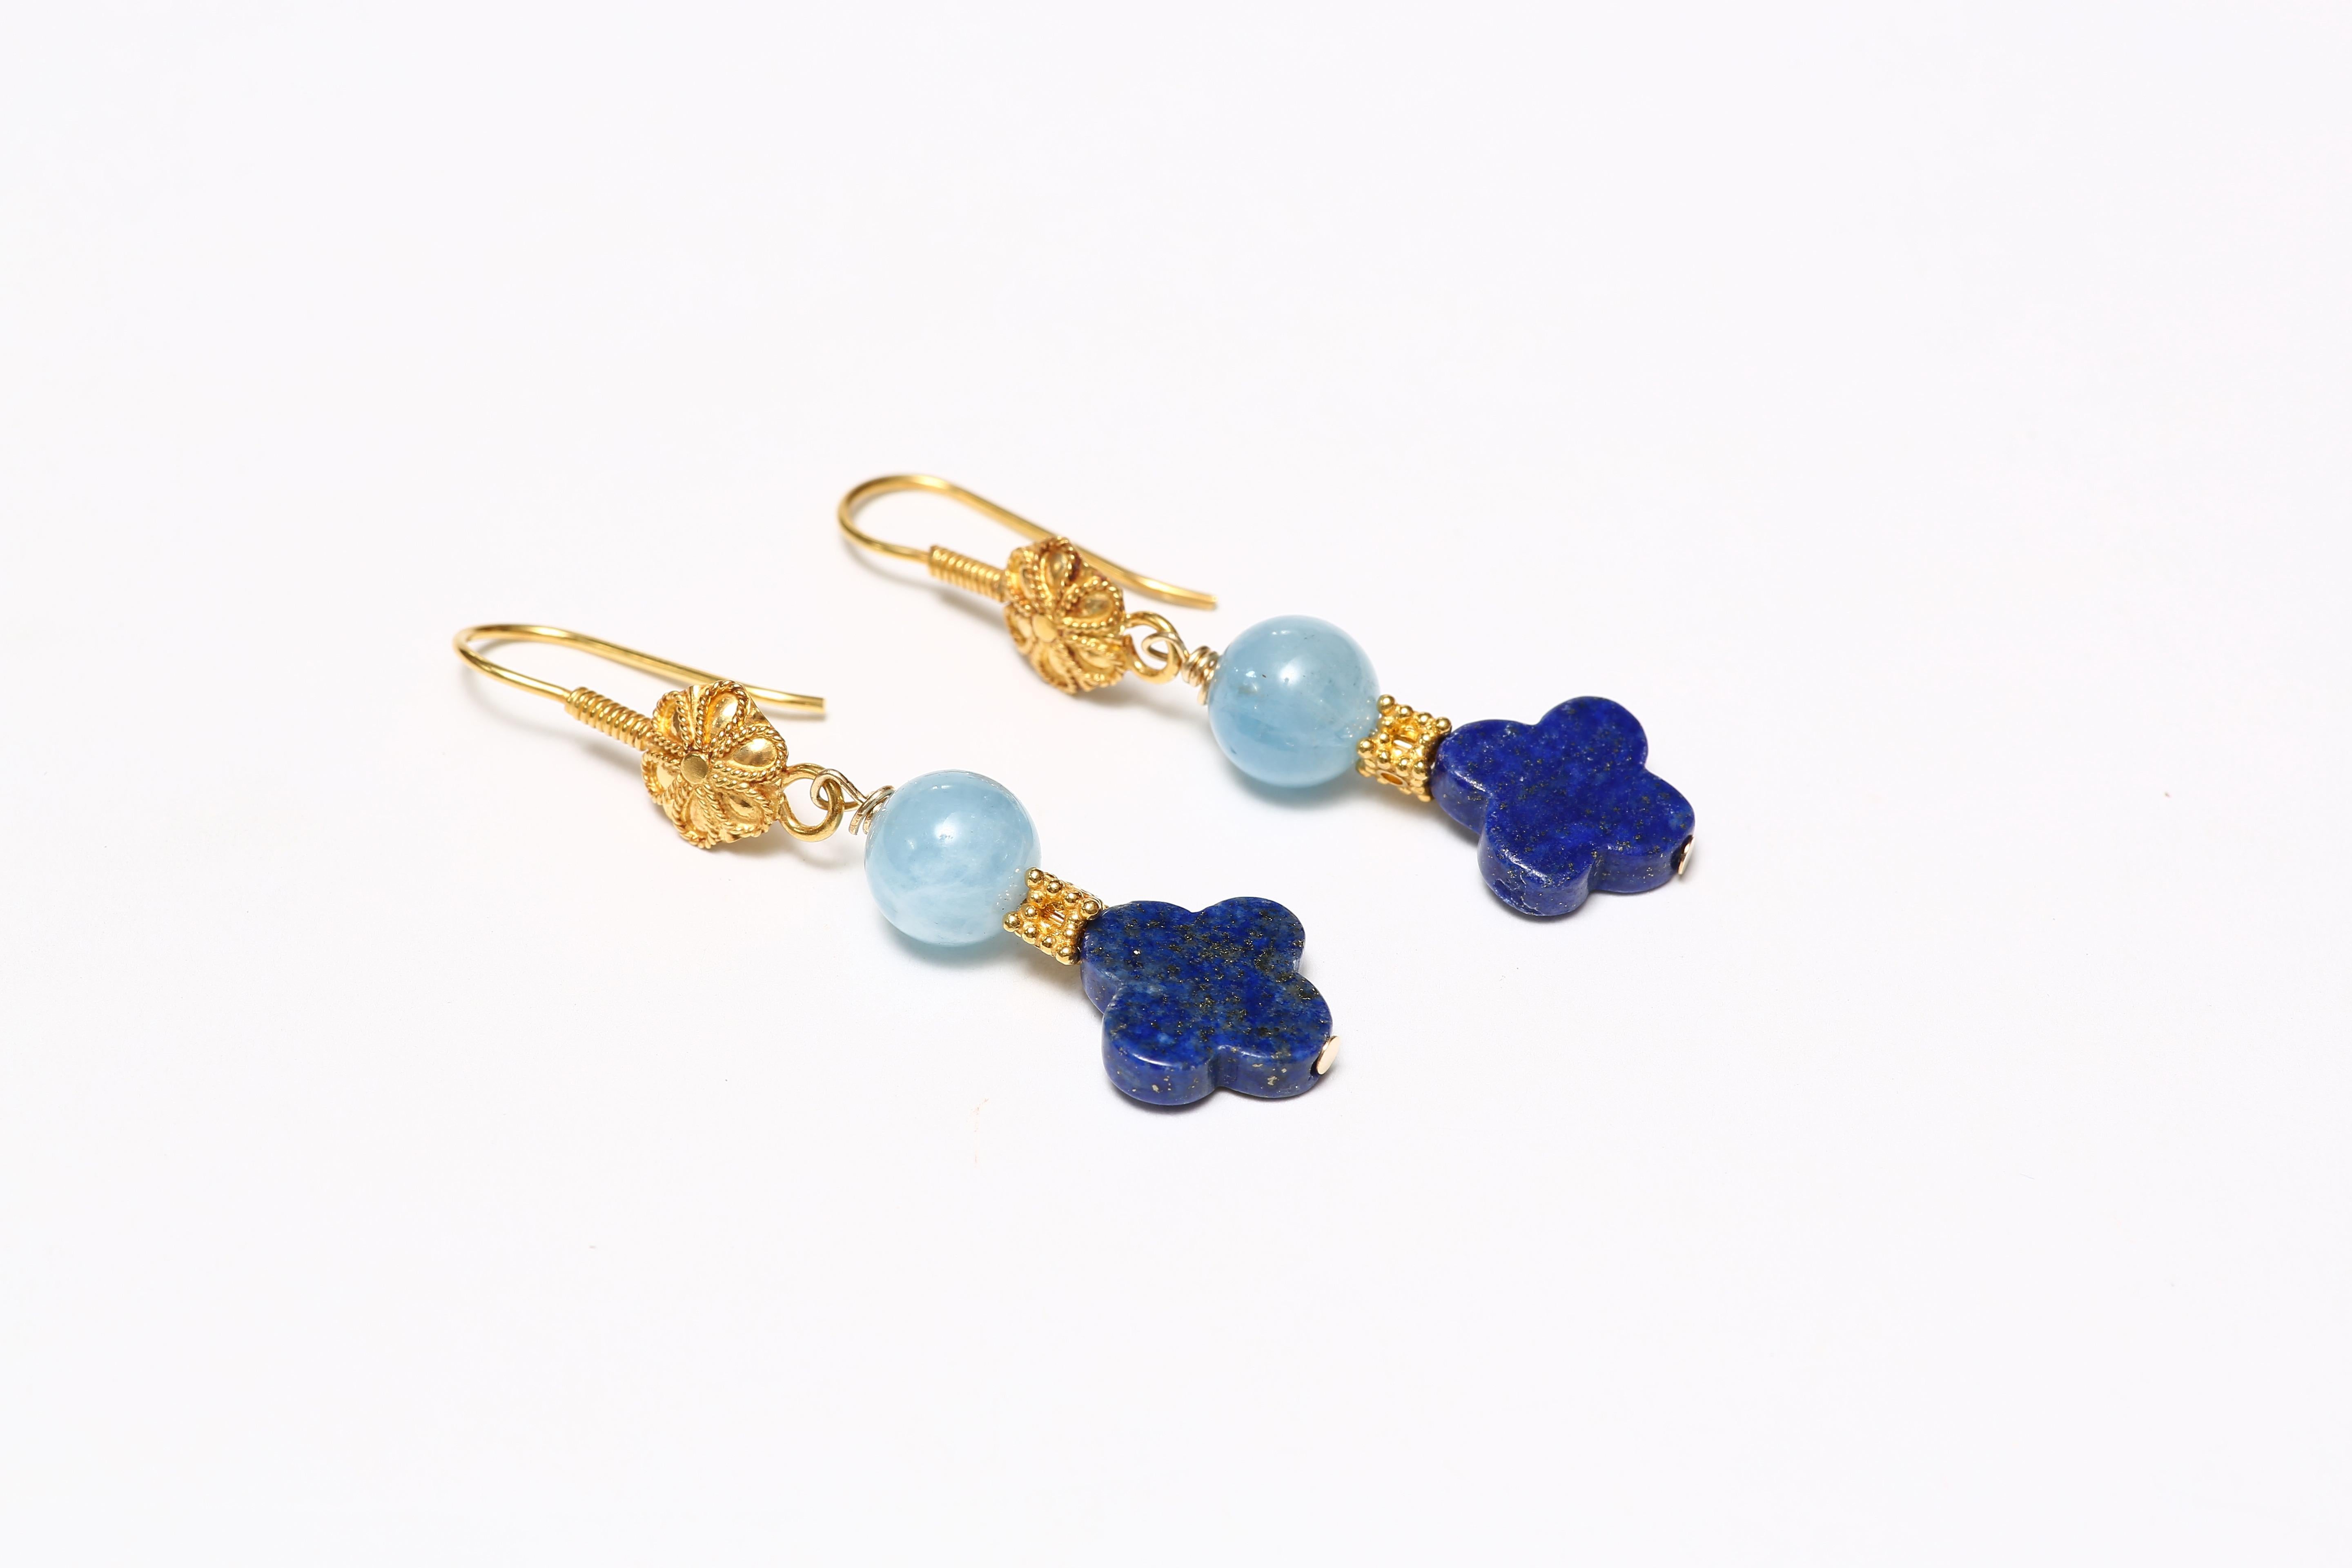 A charming pair of earrings handcrafted with solid 18K gold hooks with a flower front, with drops of an aquamarine bead and a quatrafoil vibrant blue lapiz bead, spaced by 18k solid gold faceted bead. 

Designed by AMANDA CLARK for Altfield, our